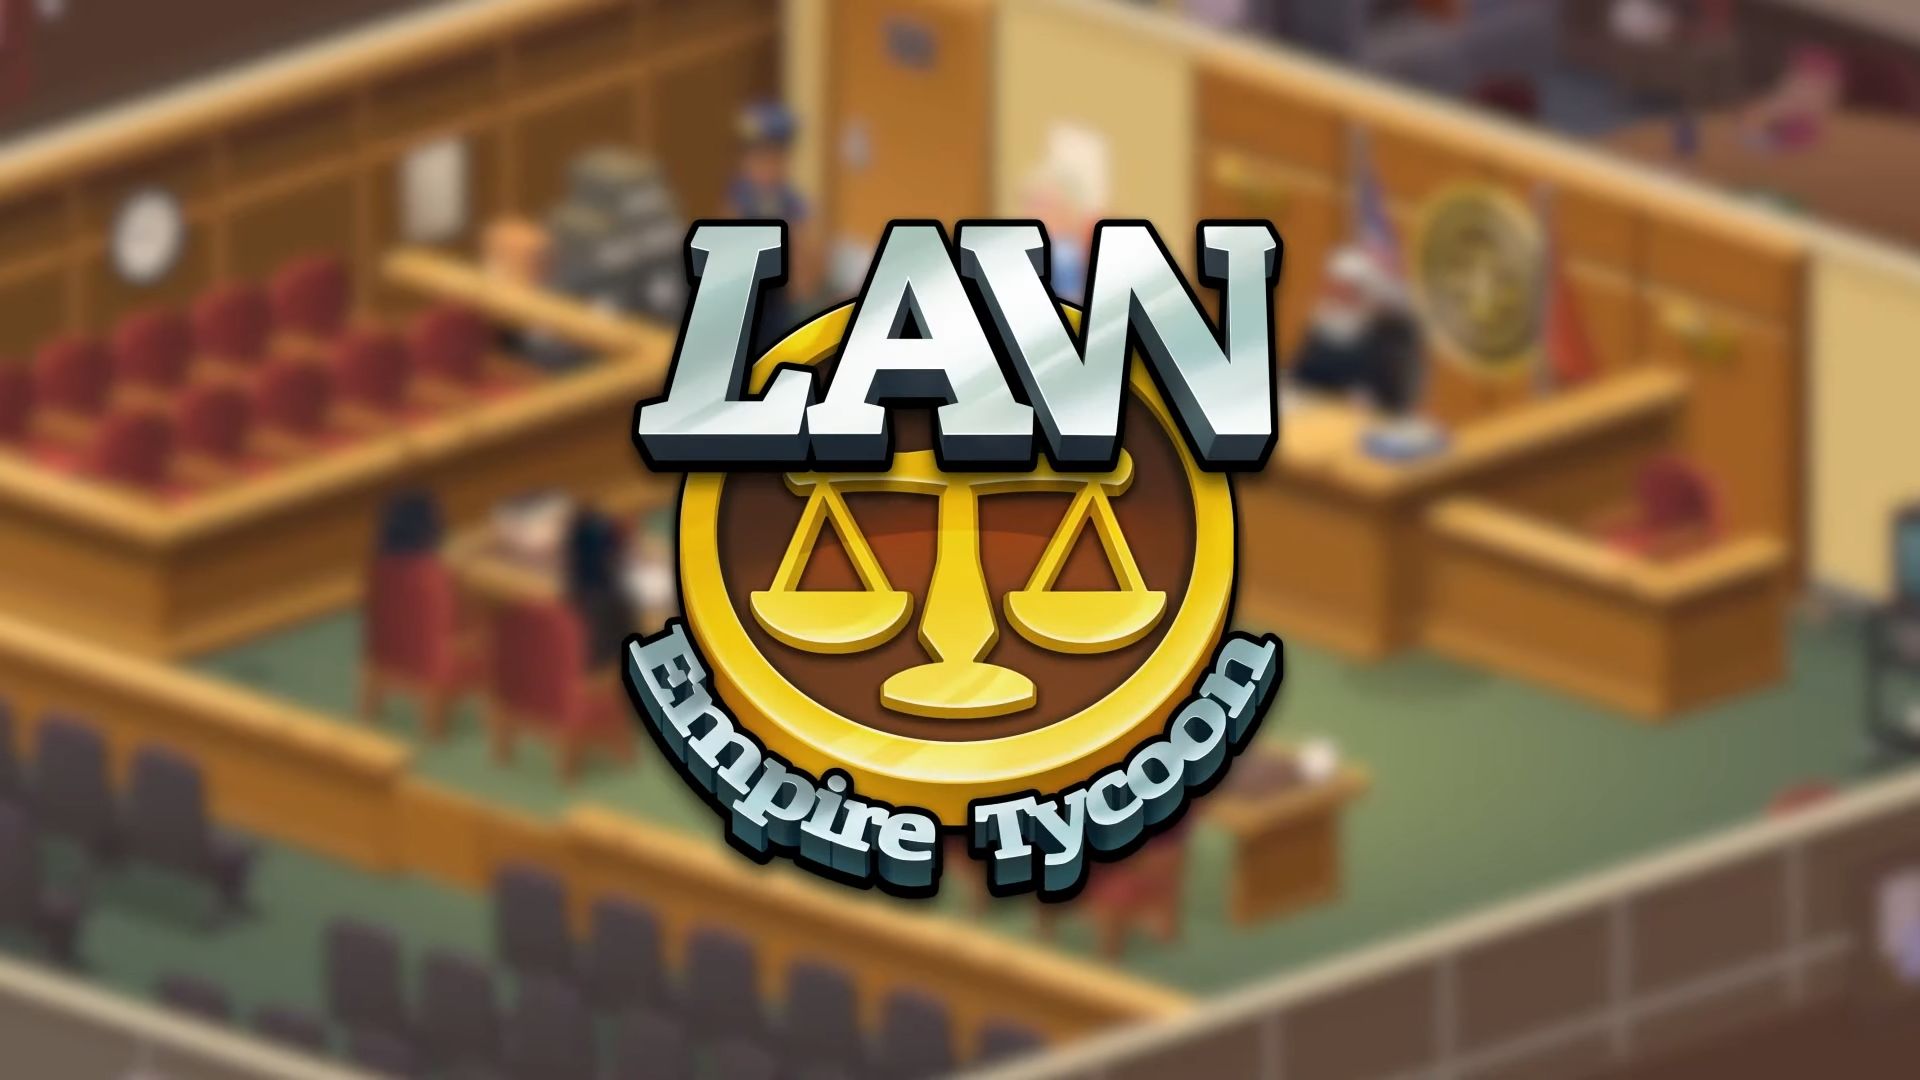 Law Empire Tycoon - Idle Game Justice Simulator for Android